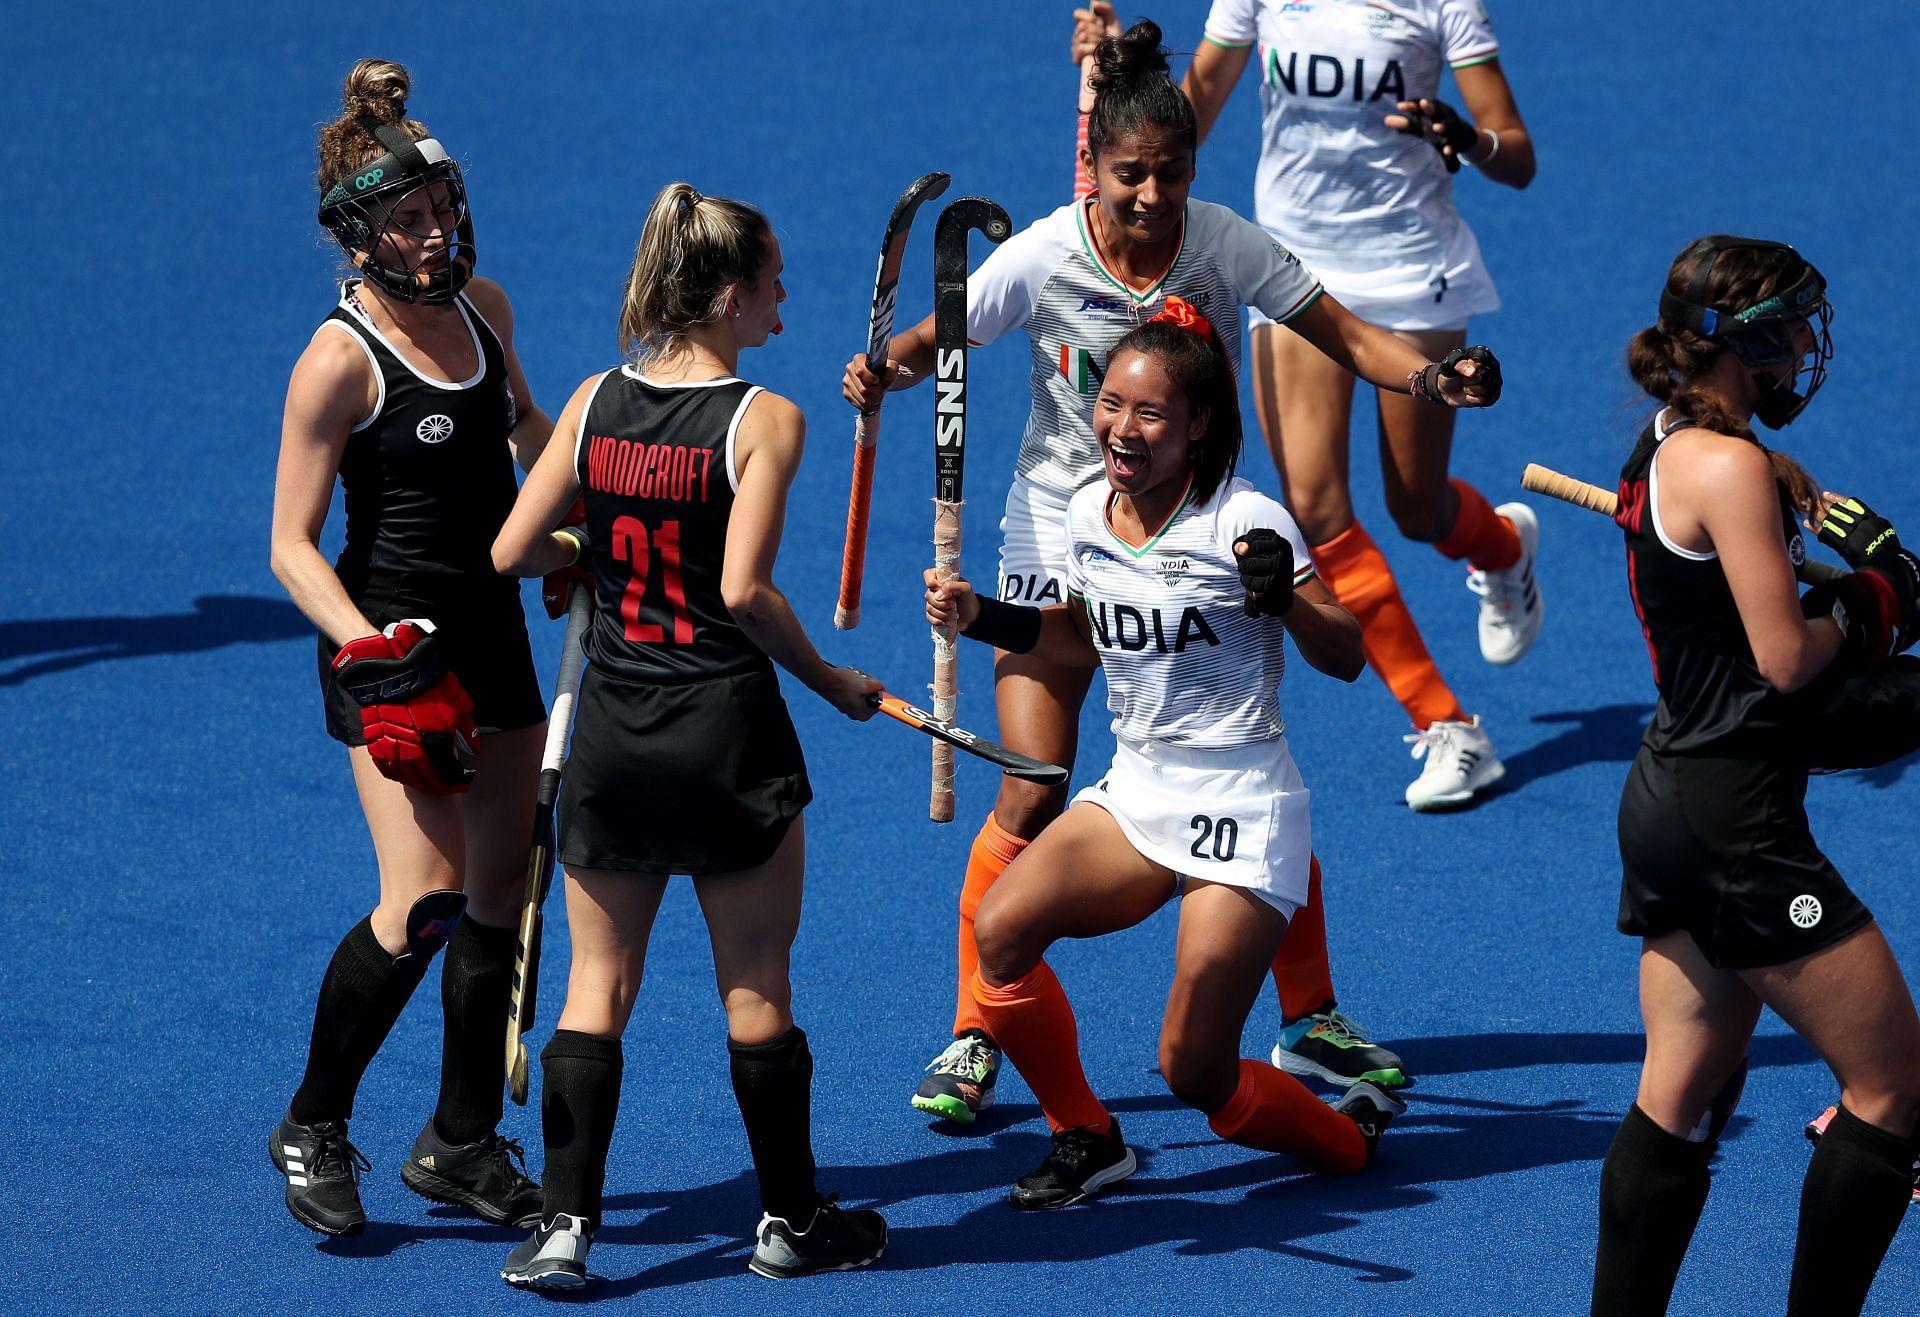 India&#039;s Lalremsiami celebrates after scoring against Canada. (PC: Getty Images)